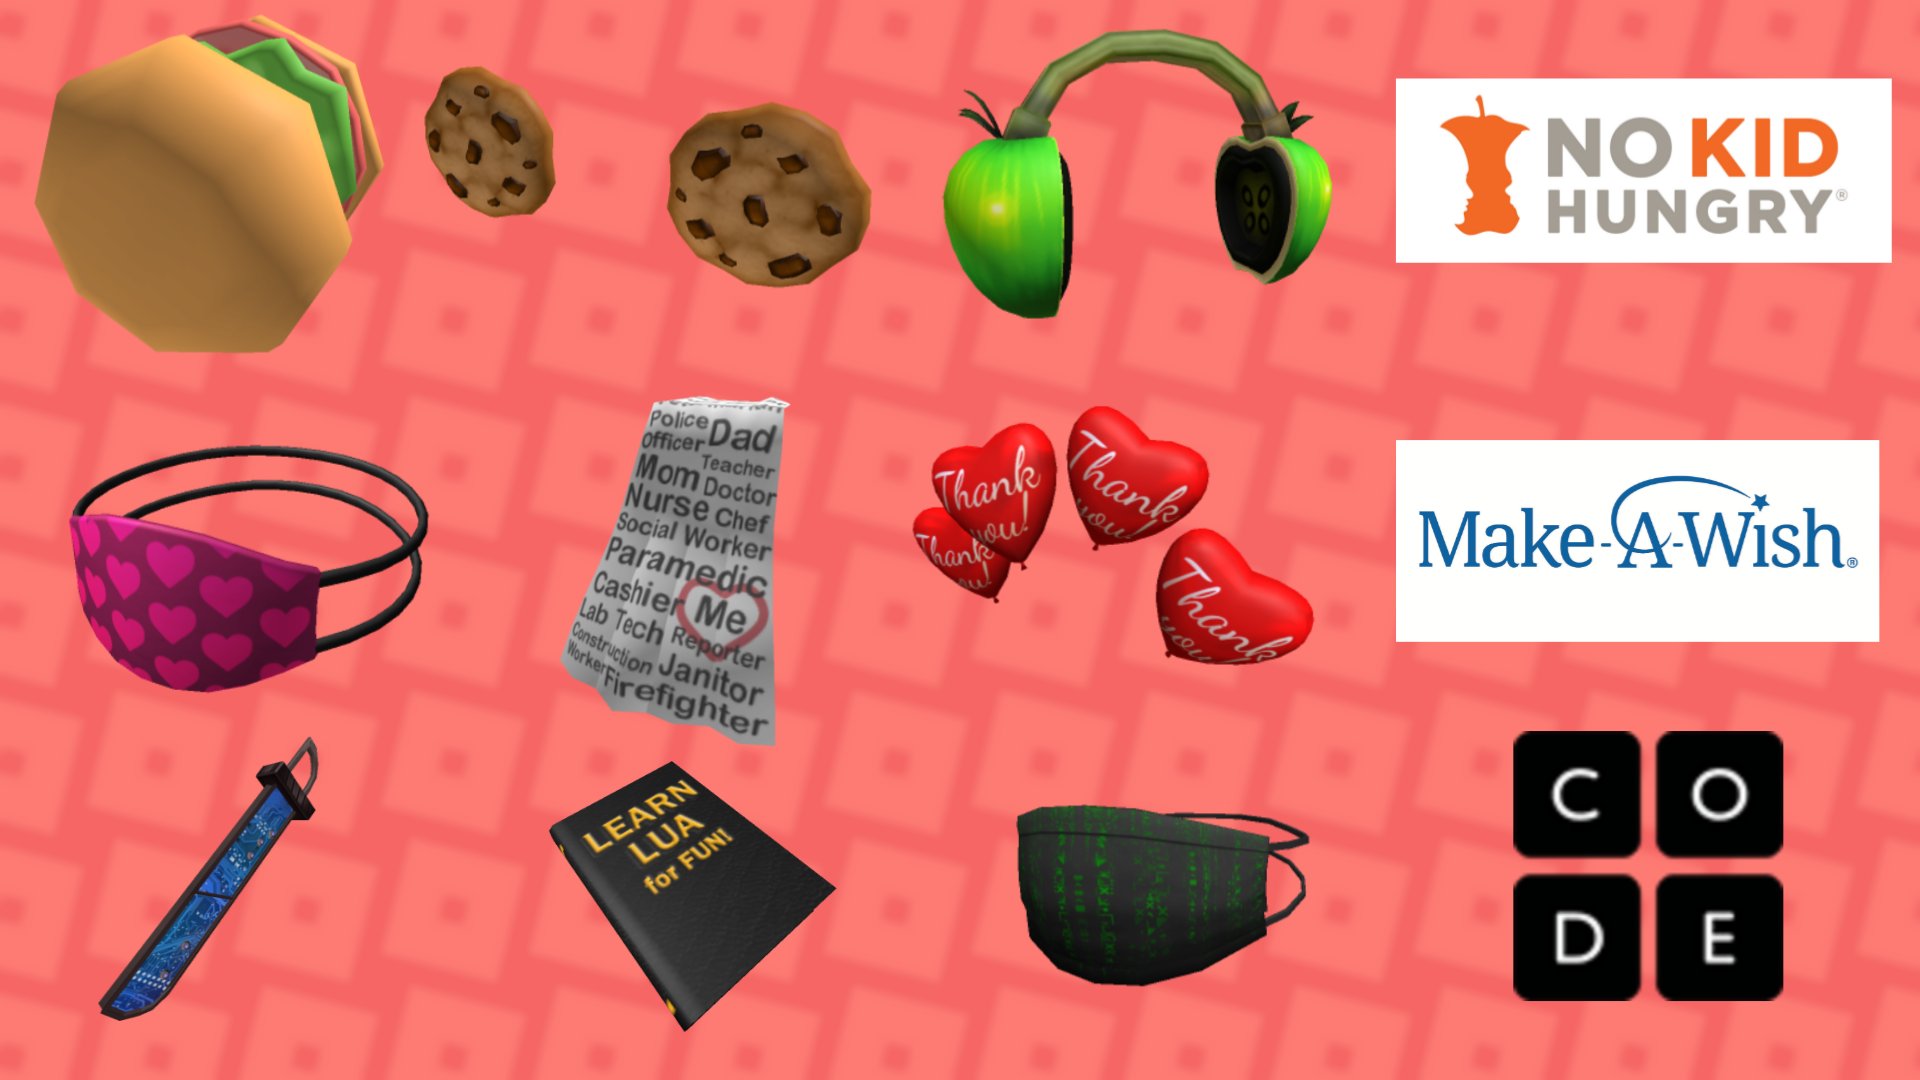 Rbxnews On Twitter Make Sure To Purchase These Charity Items That Are Releasing Later Today 1 Robux Spent 0 01 Donated To The Corresponding Charity You Ve Got Until June 30th - things to buy with 1 robux